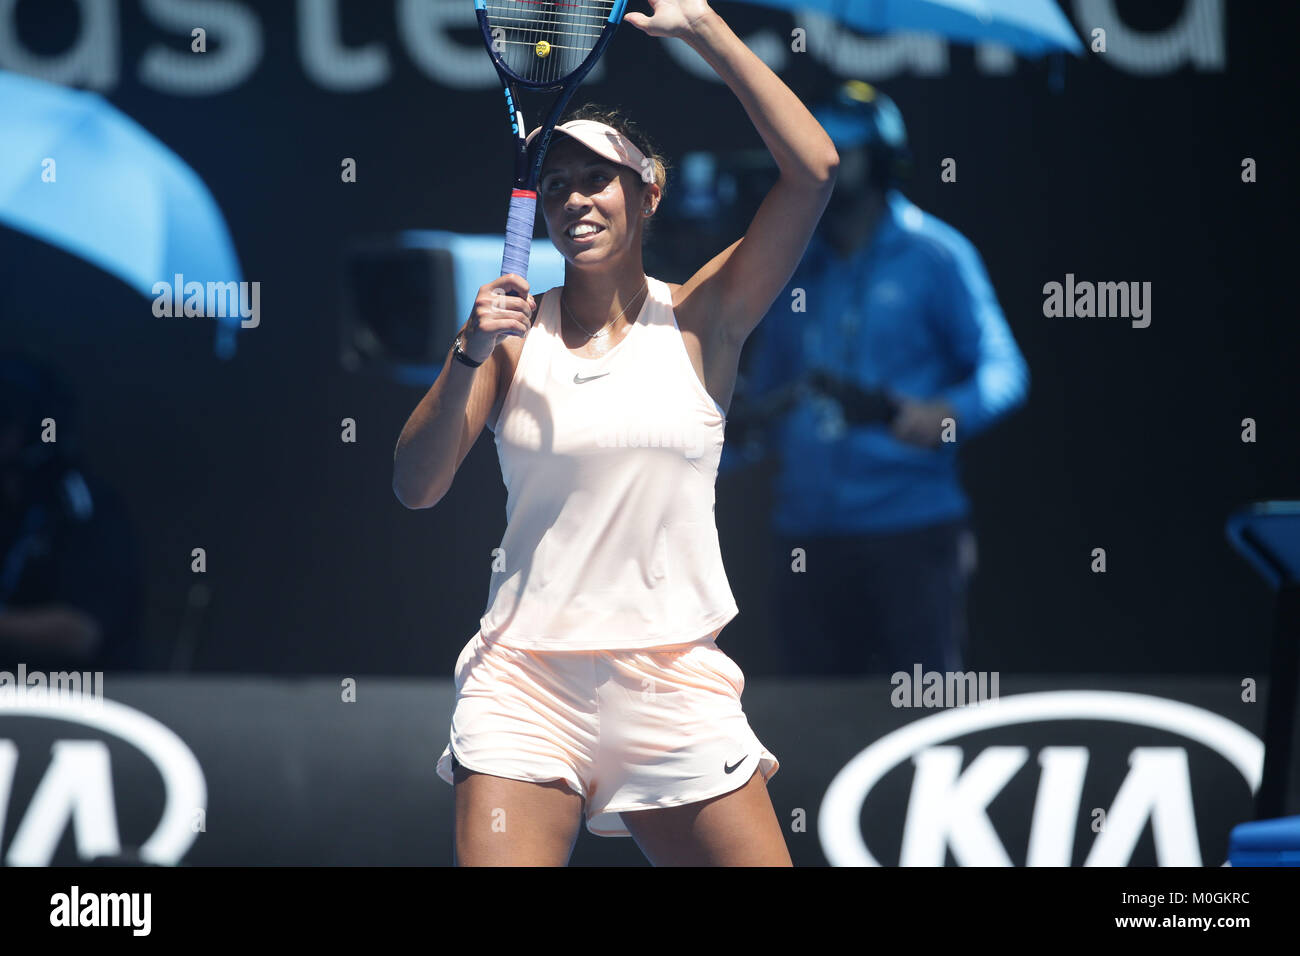 Melbourne, AUS, 22th January 2018:  Tennis player Madison Keys in action during the 2018 Australian Open at Melbourne Park. Credit: Frank Molter/Alamy Live News Stock Photo